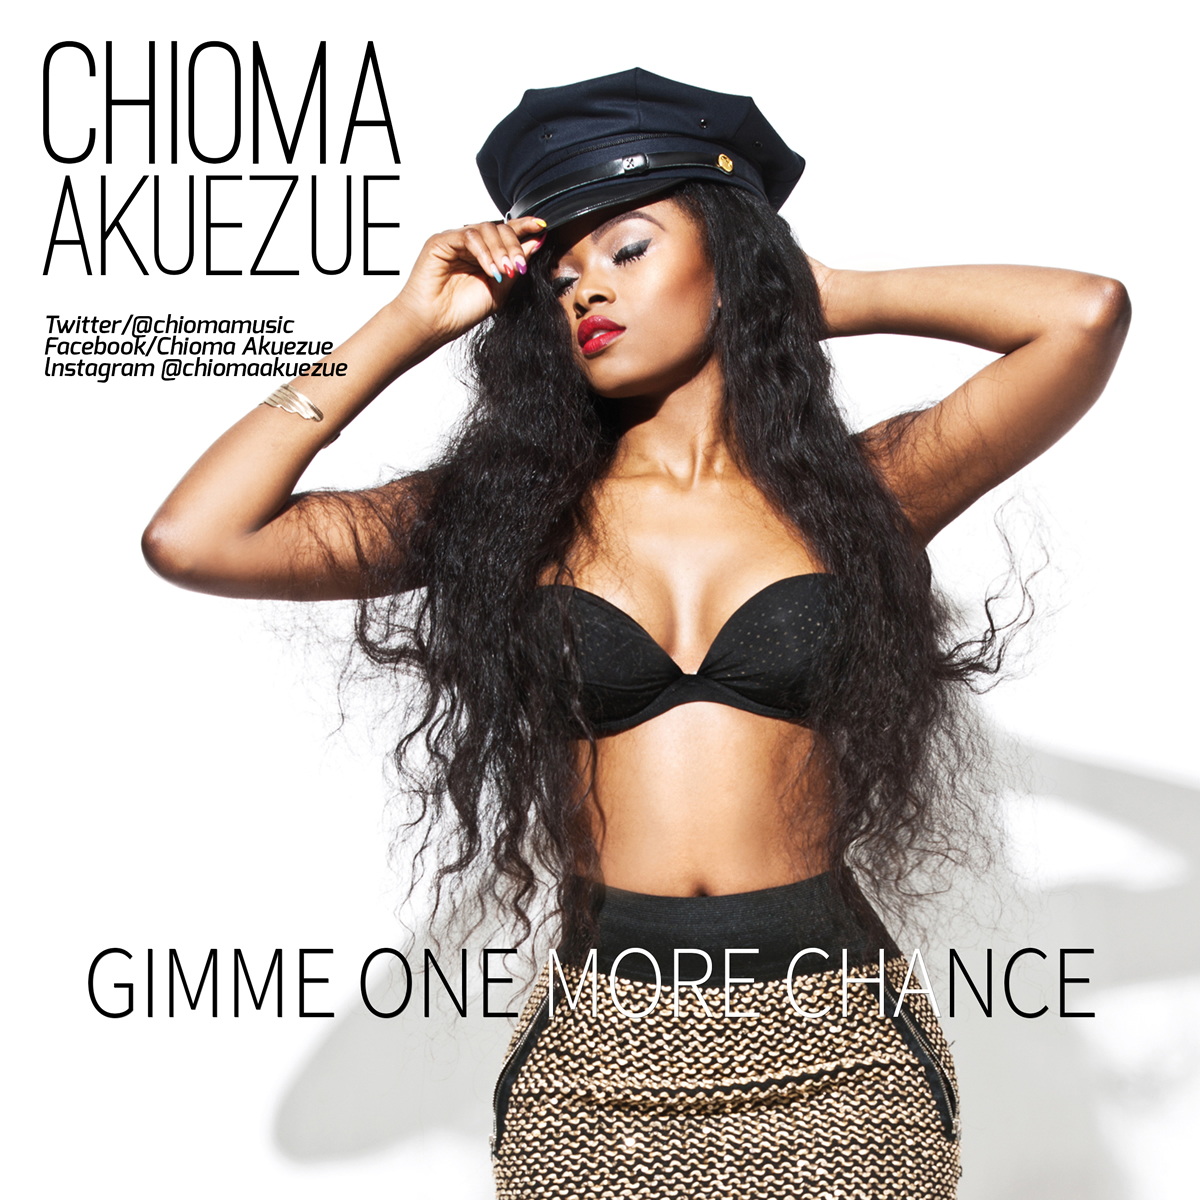 VIDEO: Chioma Akuezue – Gimme One More Chance